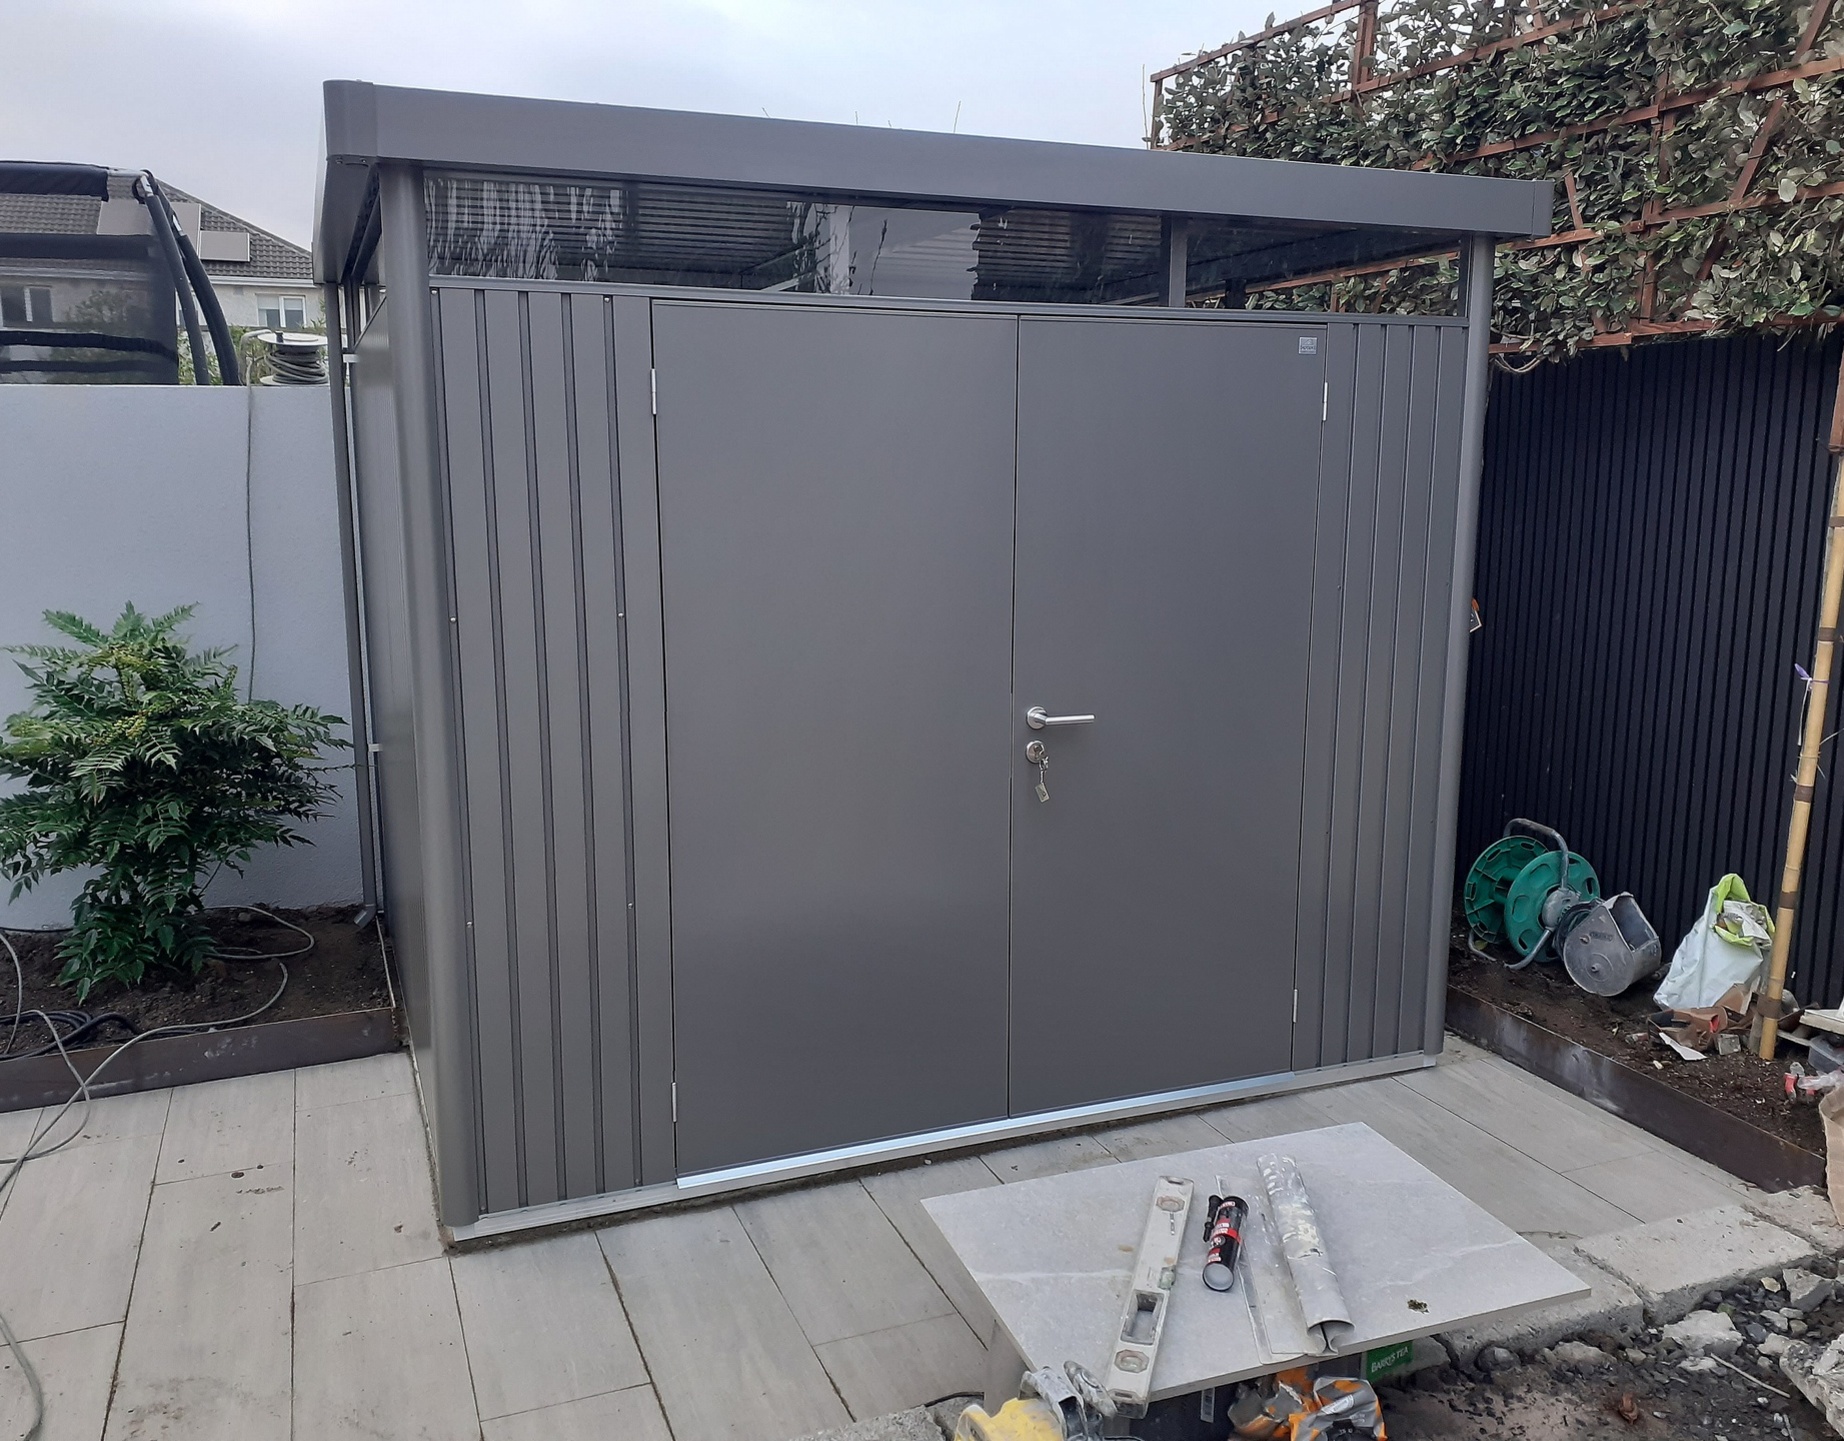 Biohort HighLine H3 Garden Shed - exceptional quality, modern steel garden shed, blending functionality, durability and sleek contemporary design  |  Supplied + Fitted in Malahide, Co Dublin by Owen Chubb Landscapers - Ireland's premier Biohort Supplier & Installer.